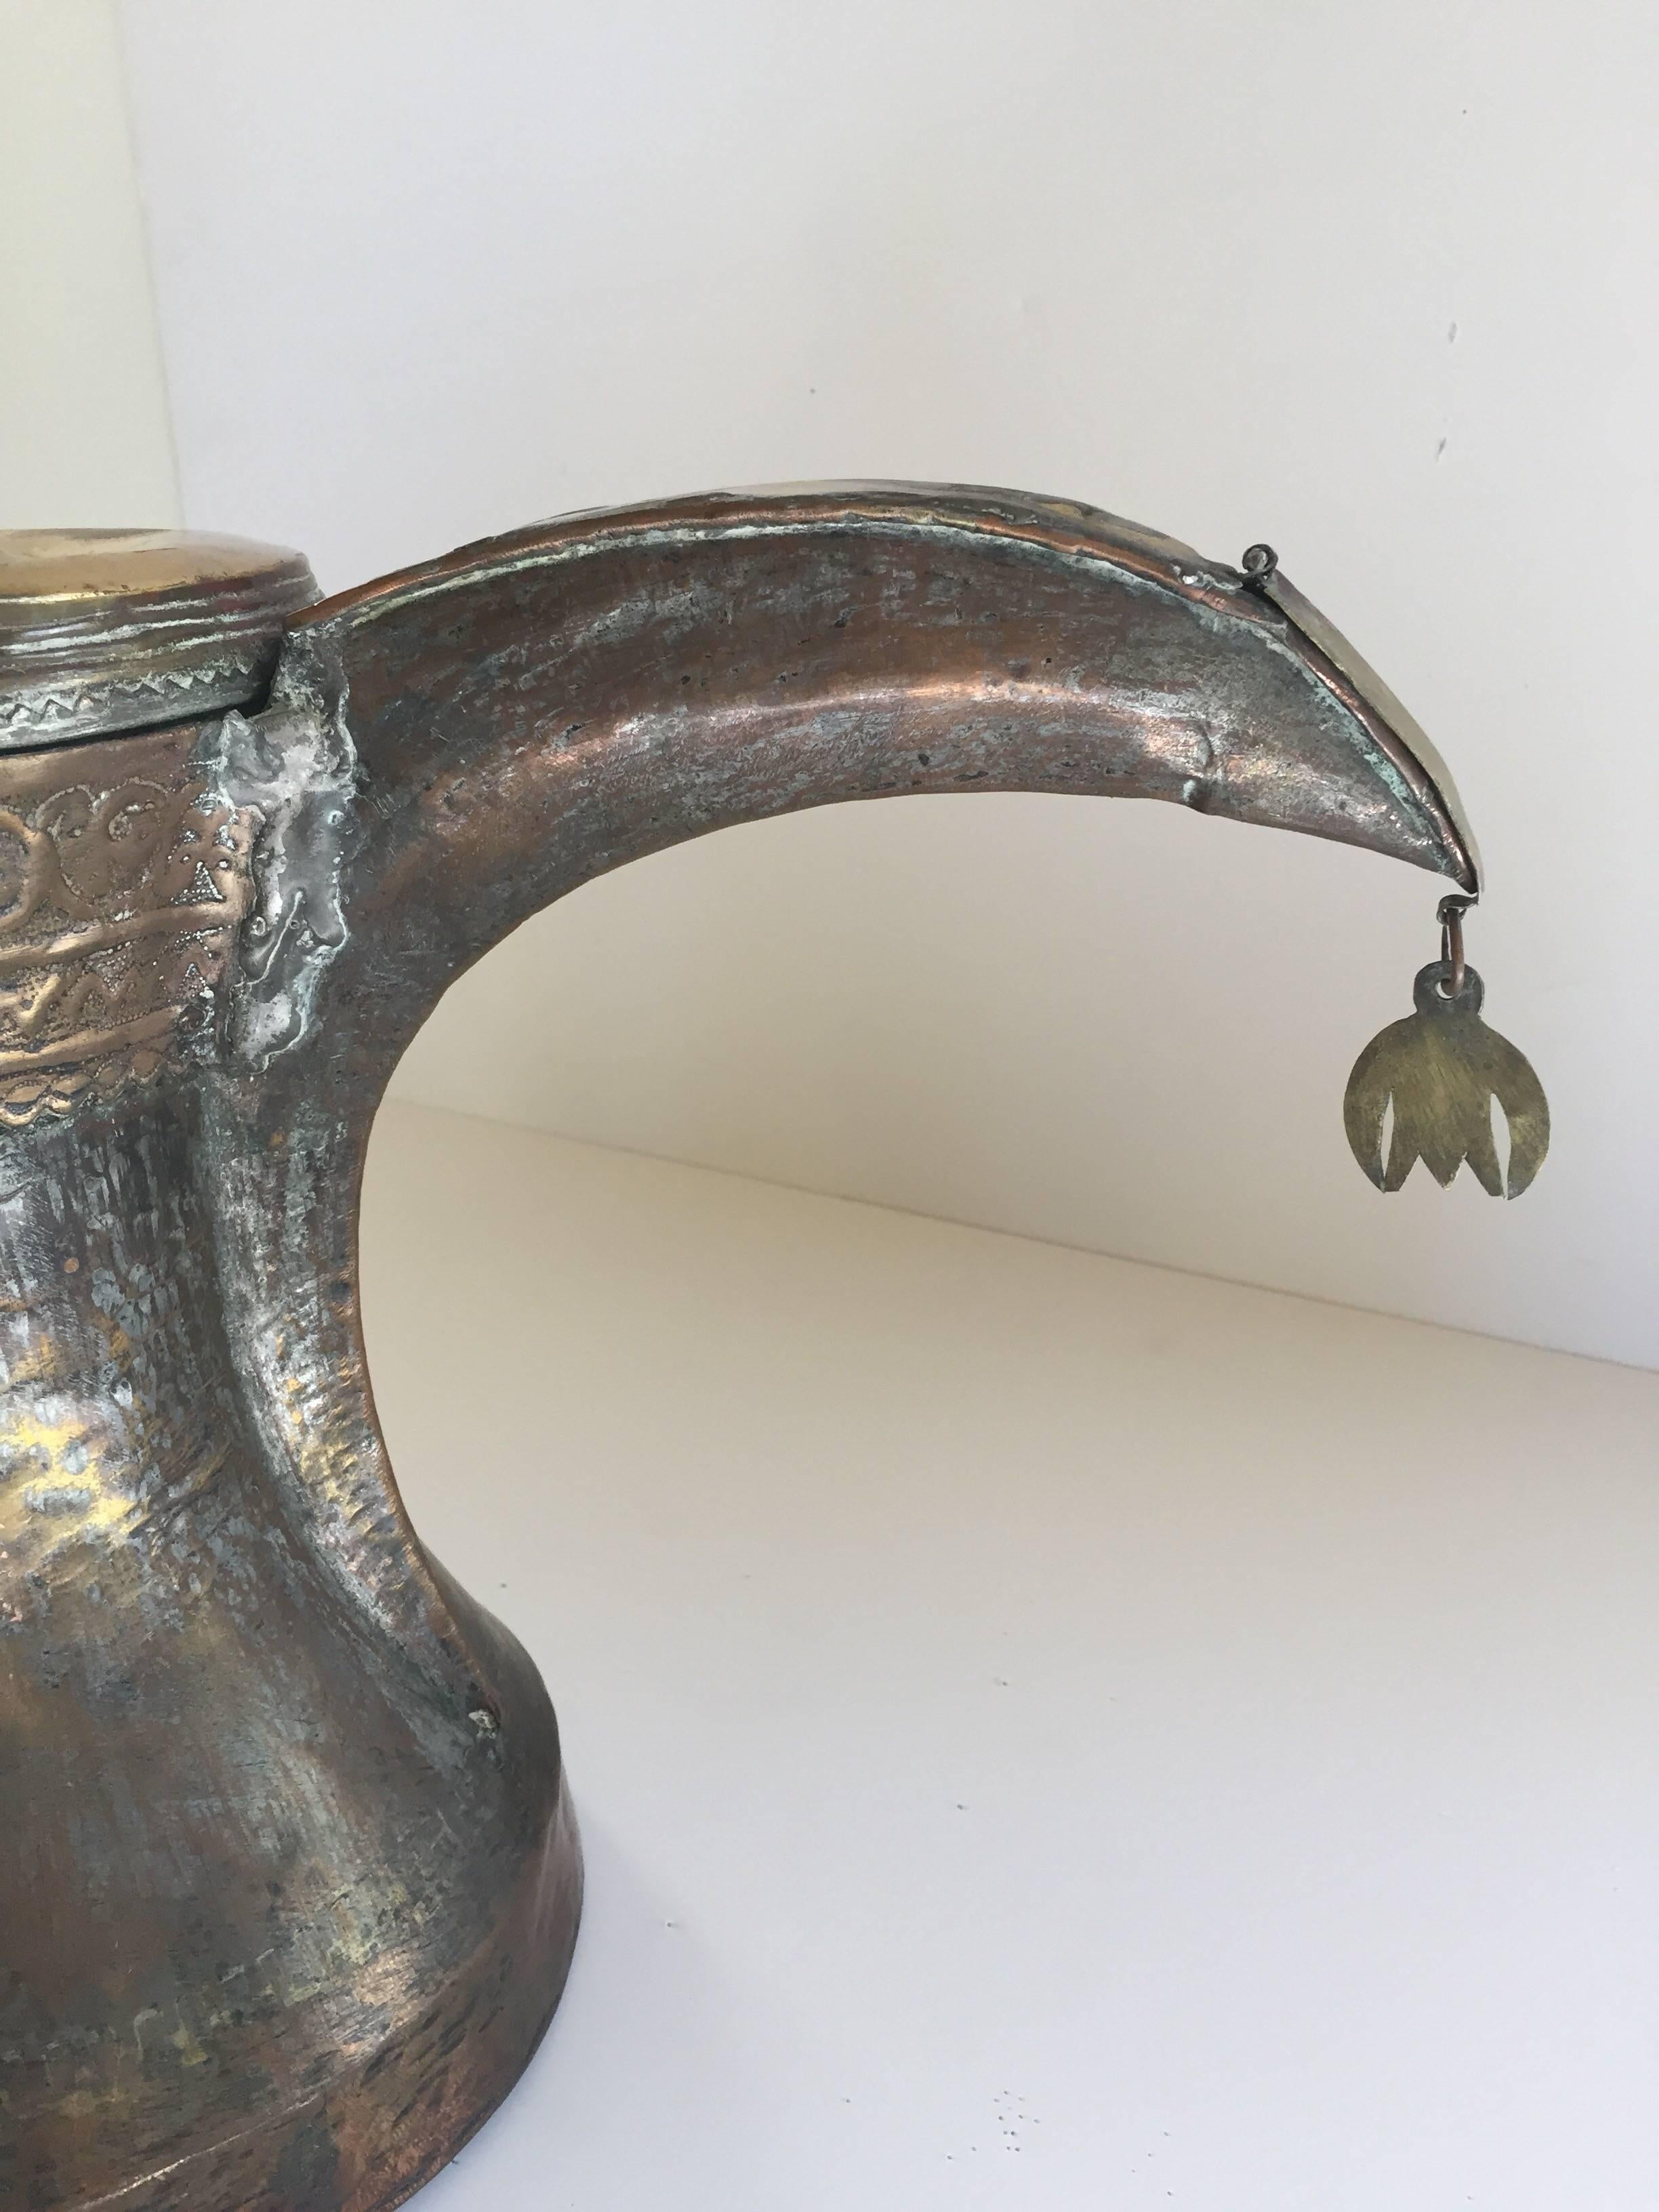 19th century Middle Eastern Arabian oversized tinned copper Dallah coffee pot.
Huge oversized antique Dallah brass coffee pot hand-hammered and chased copper with riveted finish.
This Middle Eastern Dallah Arabic Bedouin coffee pot body is made of